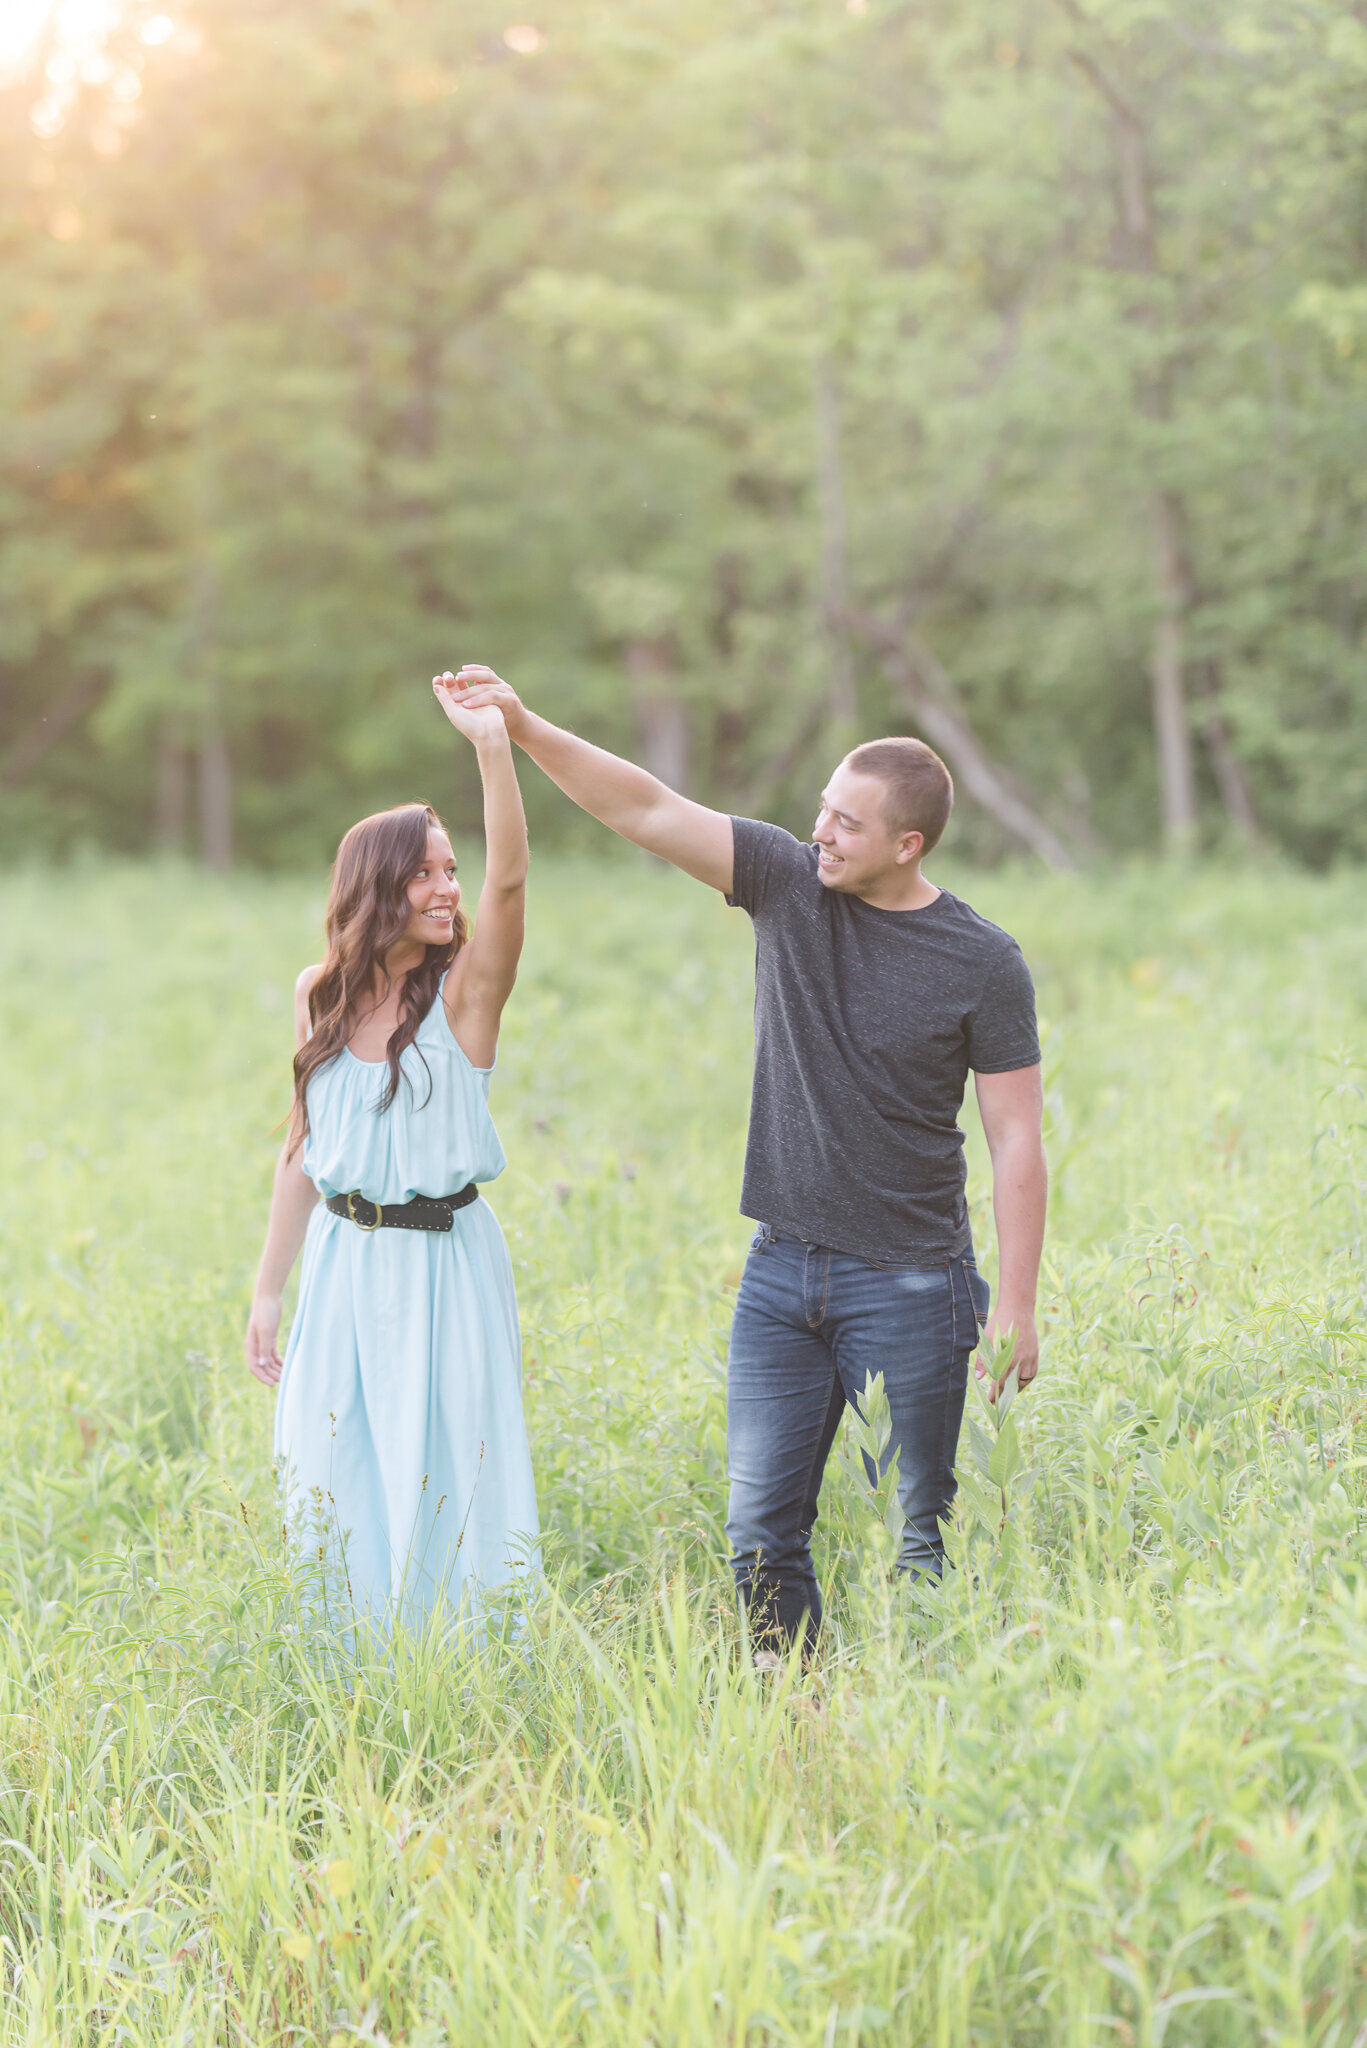 Eagle Creek Engagement Session with Puppy5537.jpg